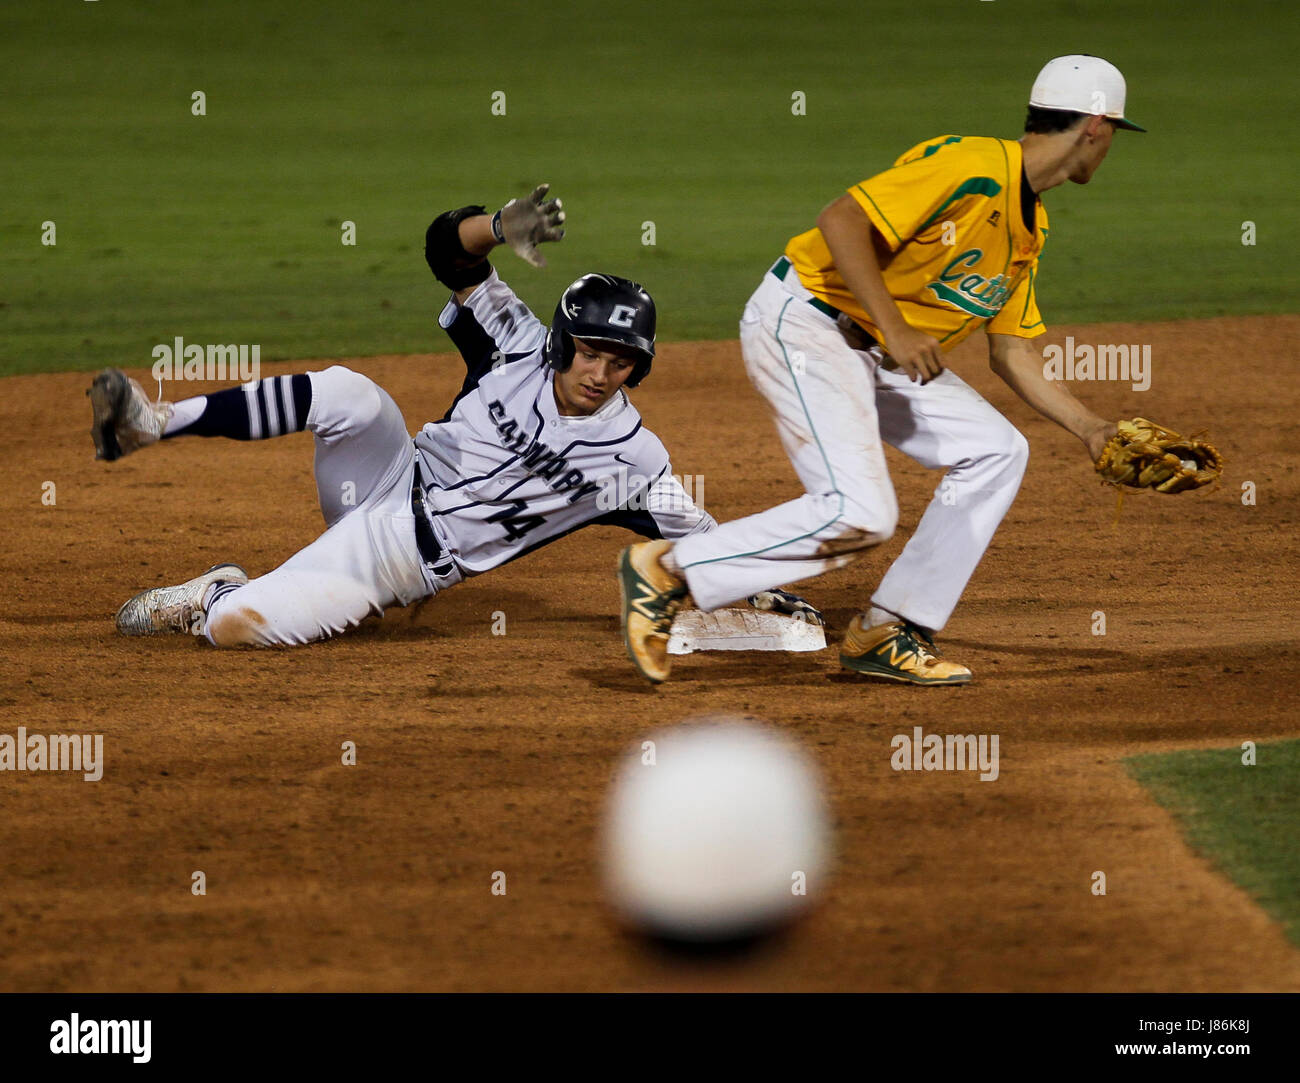 Fort Myers, Florida, USA. 27th May, 2017. MONICA HERNDON | Times.Nolan Hudi (14) of Calvary Christian, slides safe into second base during the third inning of the FHSAA class 4A baseball championship against Pensacola Catholic on Friday May 27, 2017 at Hammond Stadium in Fort Myers, Fla. Calvary defeated Pensacola Catholic 11 to 1. Credit: Monica Herndon/Tampa Bay Times/ZUMA Wire/Alamy Live News Stock Photo